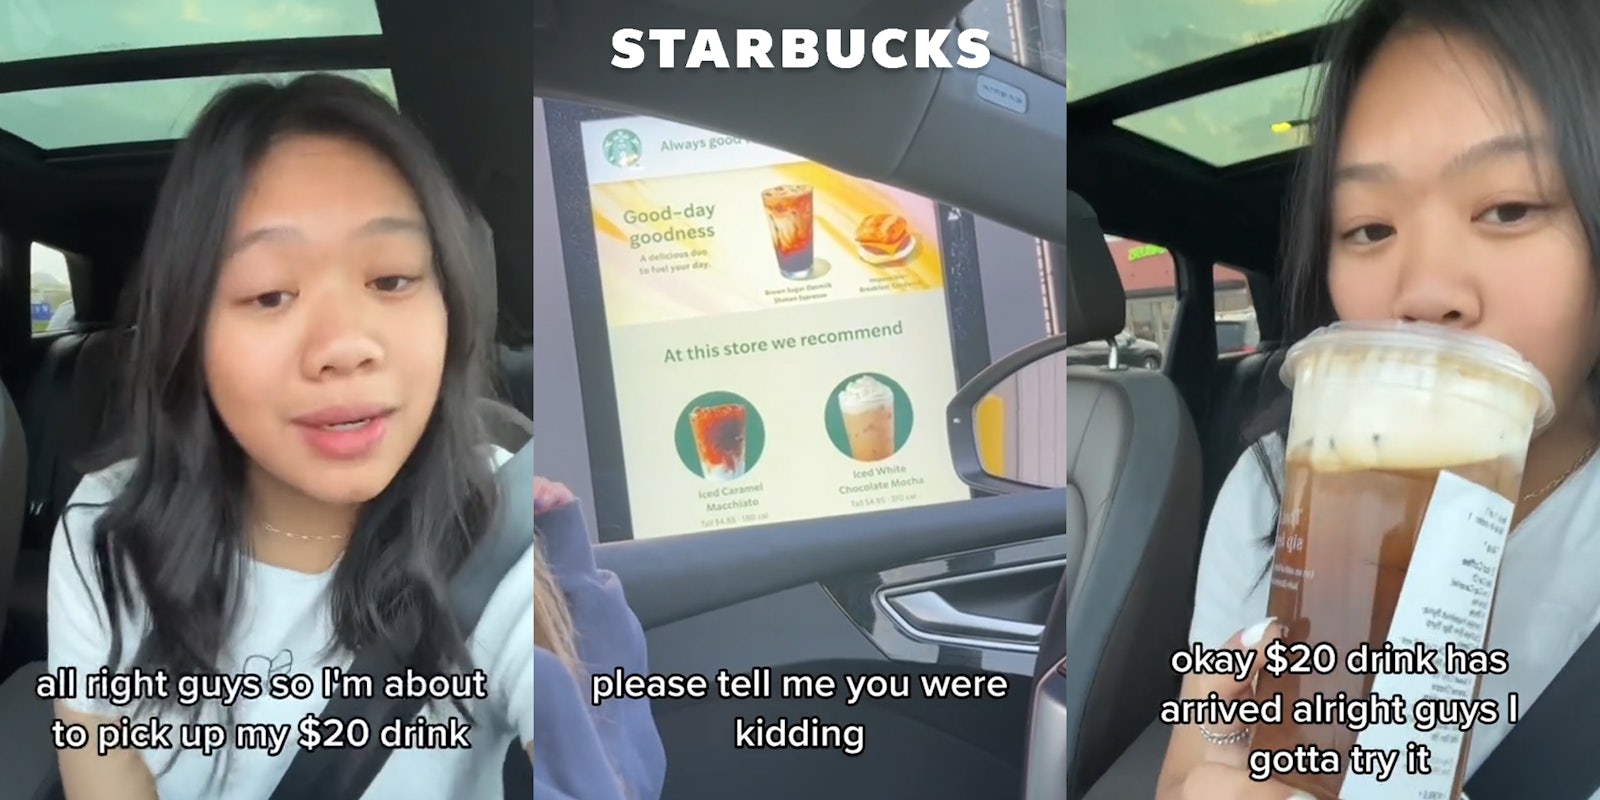 Starbucks customer speaking in car with caption 'all right guys so I'm about to pick up my $20 drink' (l) Starbucks drive thru with caption 'please tell me you were kidding' with Starbucks logo above (c) Starbucks customer drinking in car with caption 'okay $20 drink has arrived alright guys I gotta try it' (r)